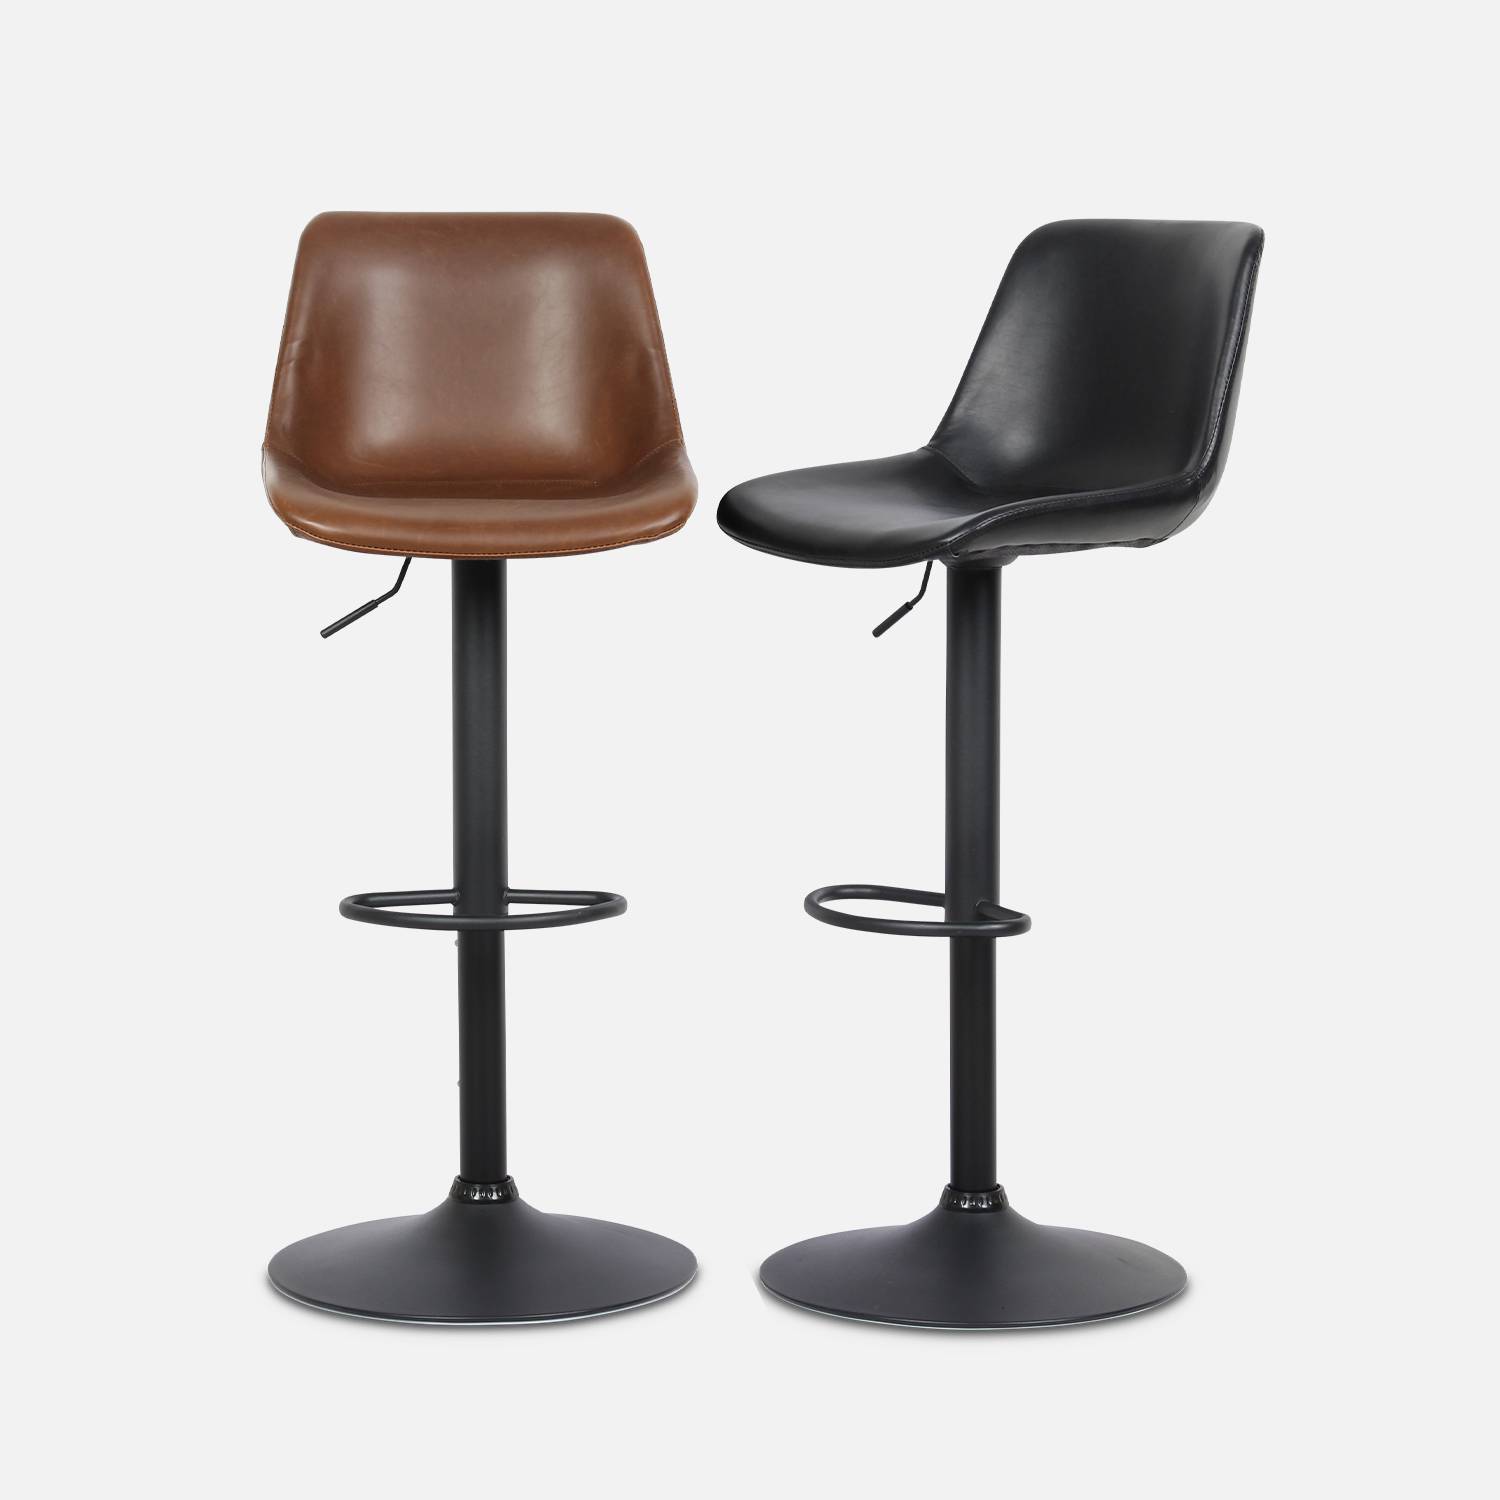 Pair of faux leather, square backrest, adjustable bar stools, seat height 61.5 - 83.5cm - Noah - Brown,sweeek,Photo8